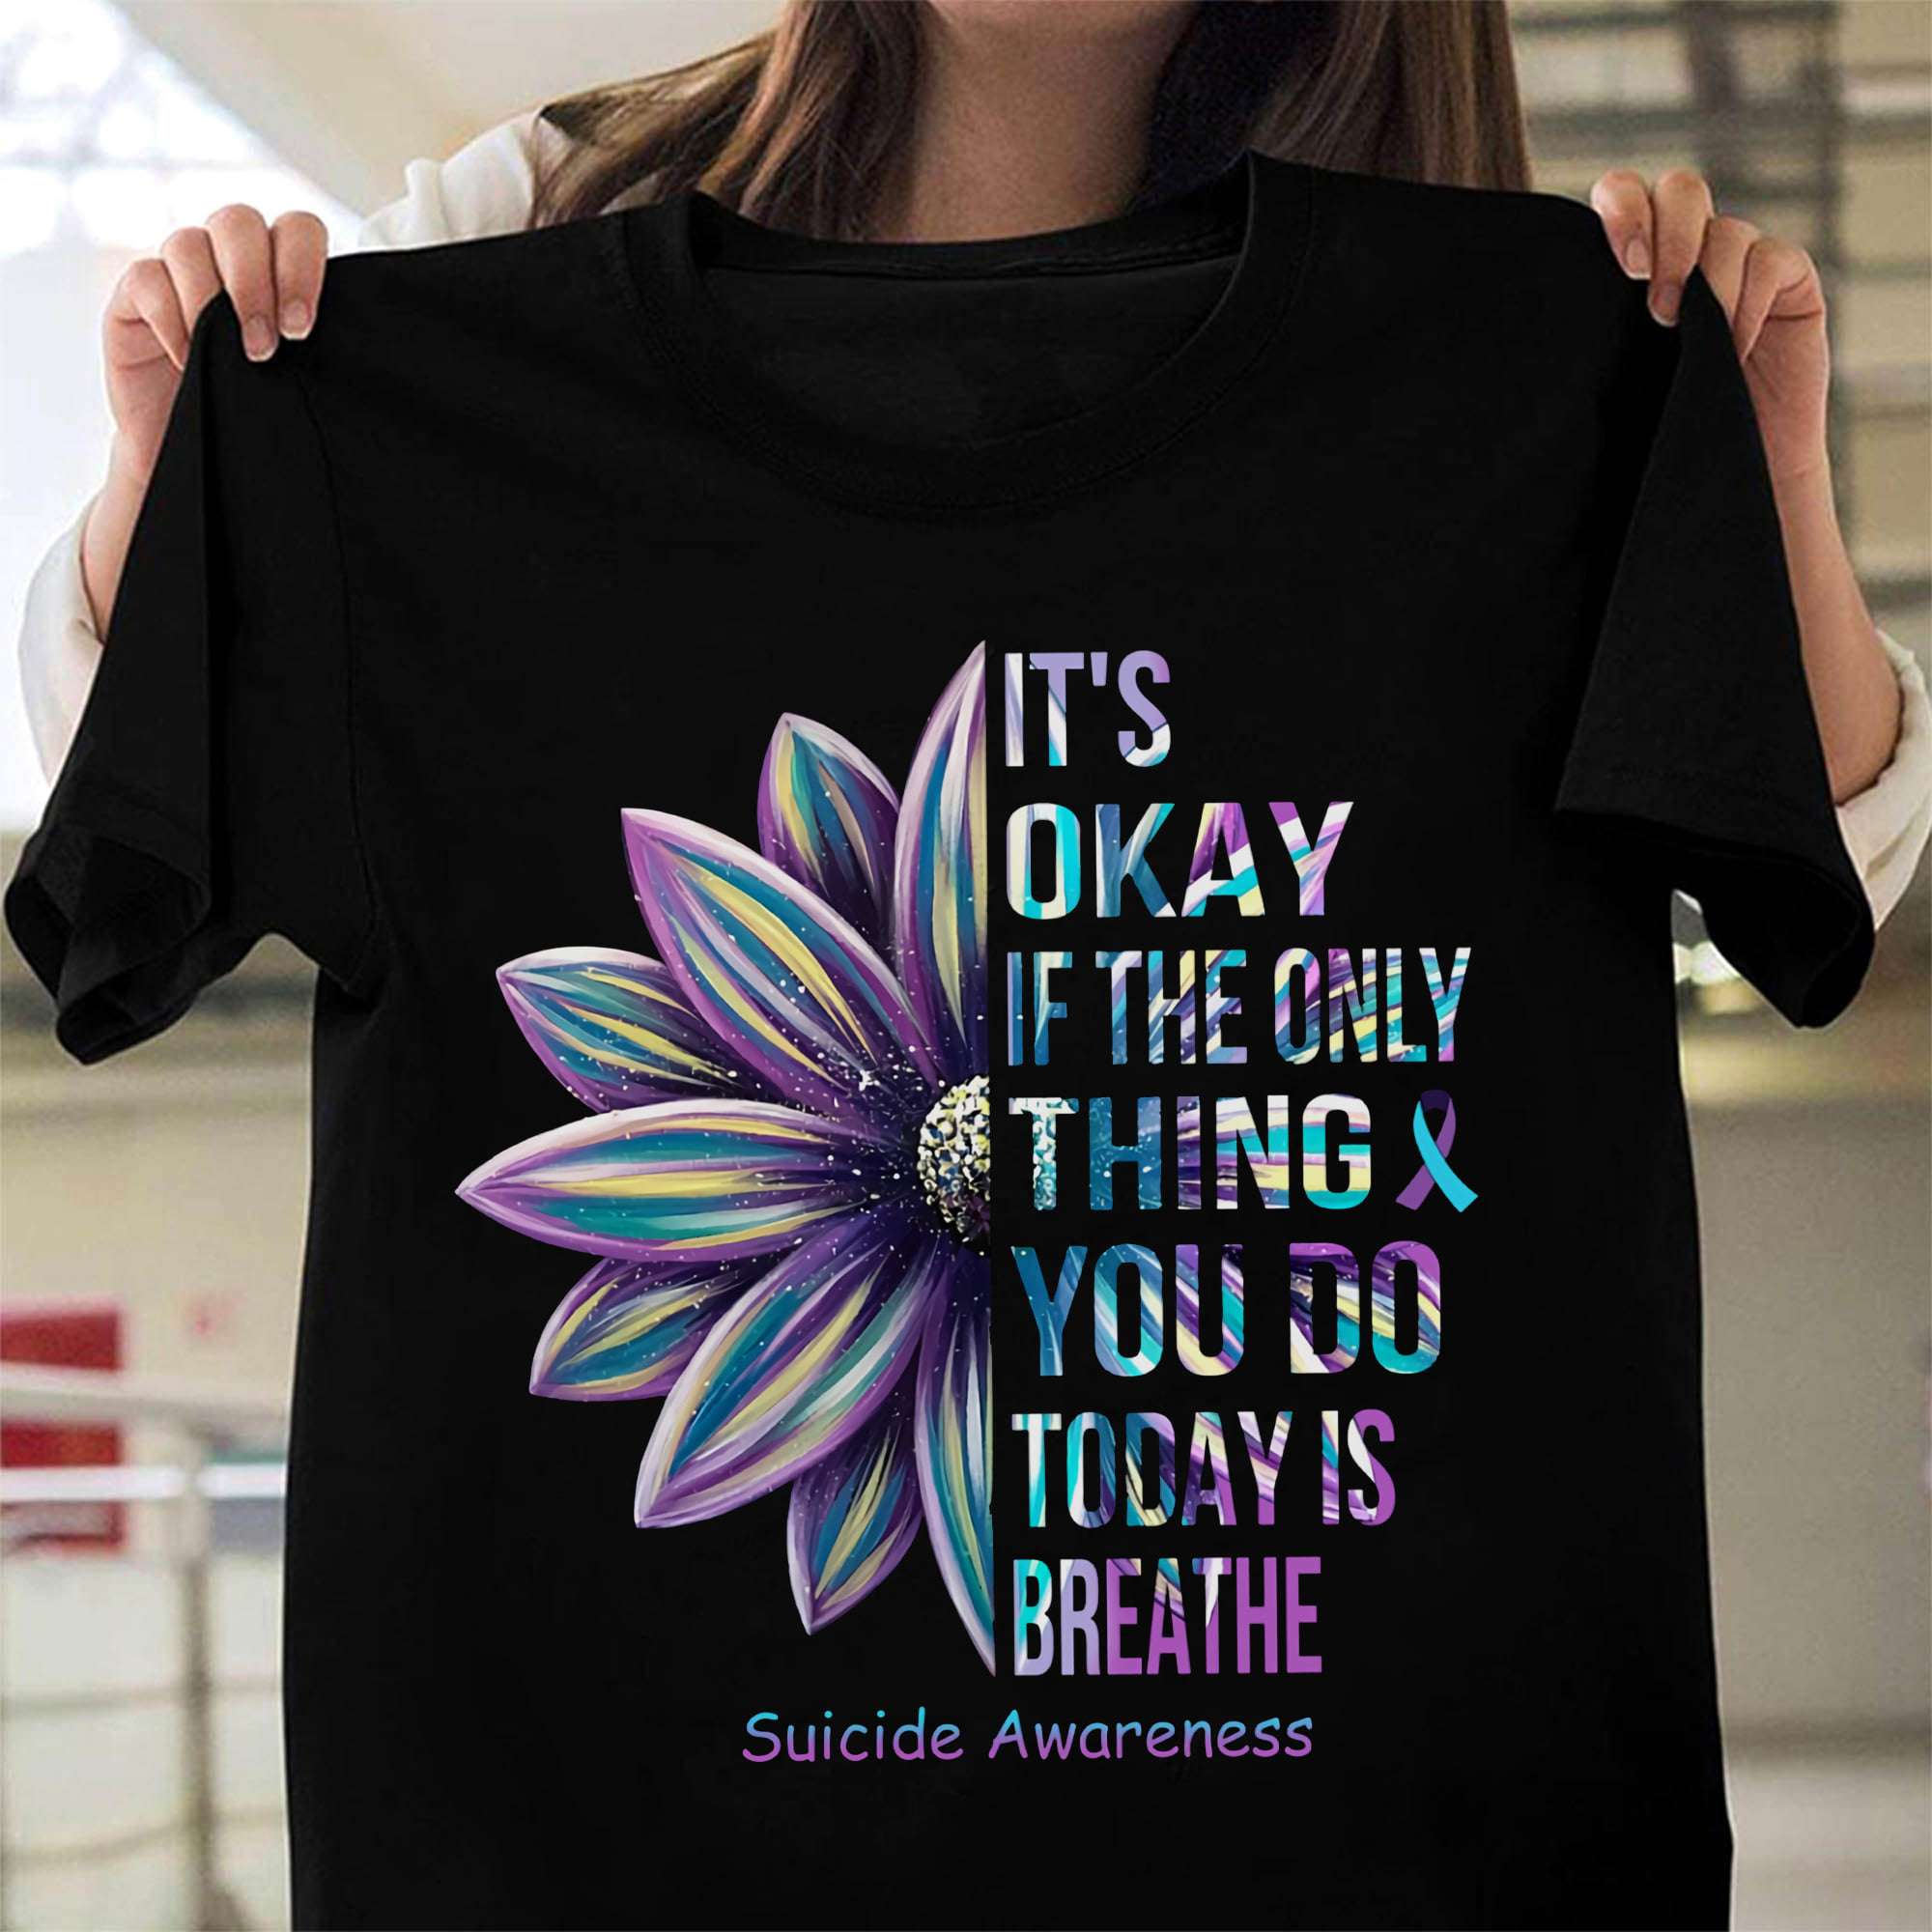 It's okay if the only thing you do today is breathe - Suicide awareness, suicide prevention